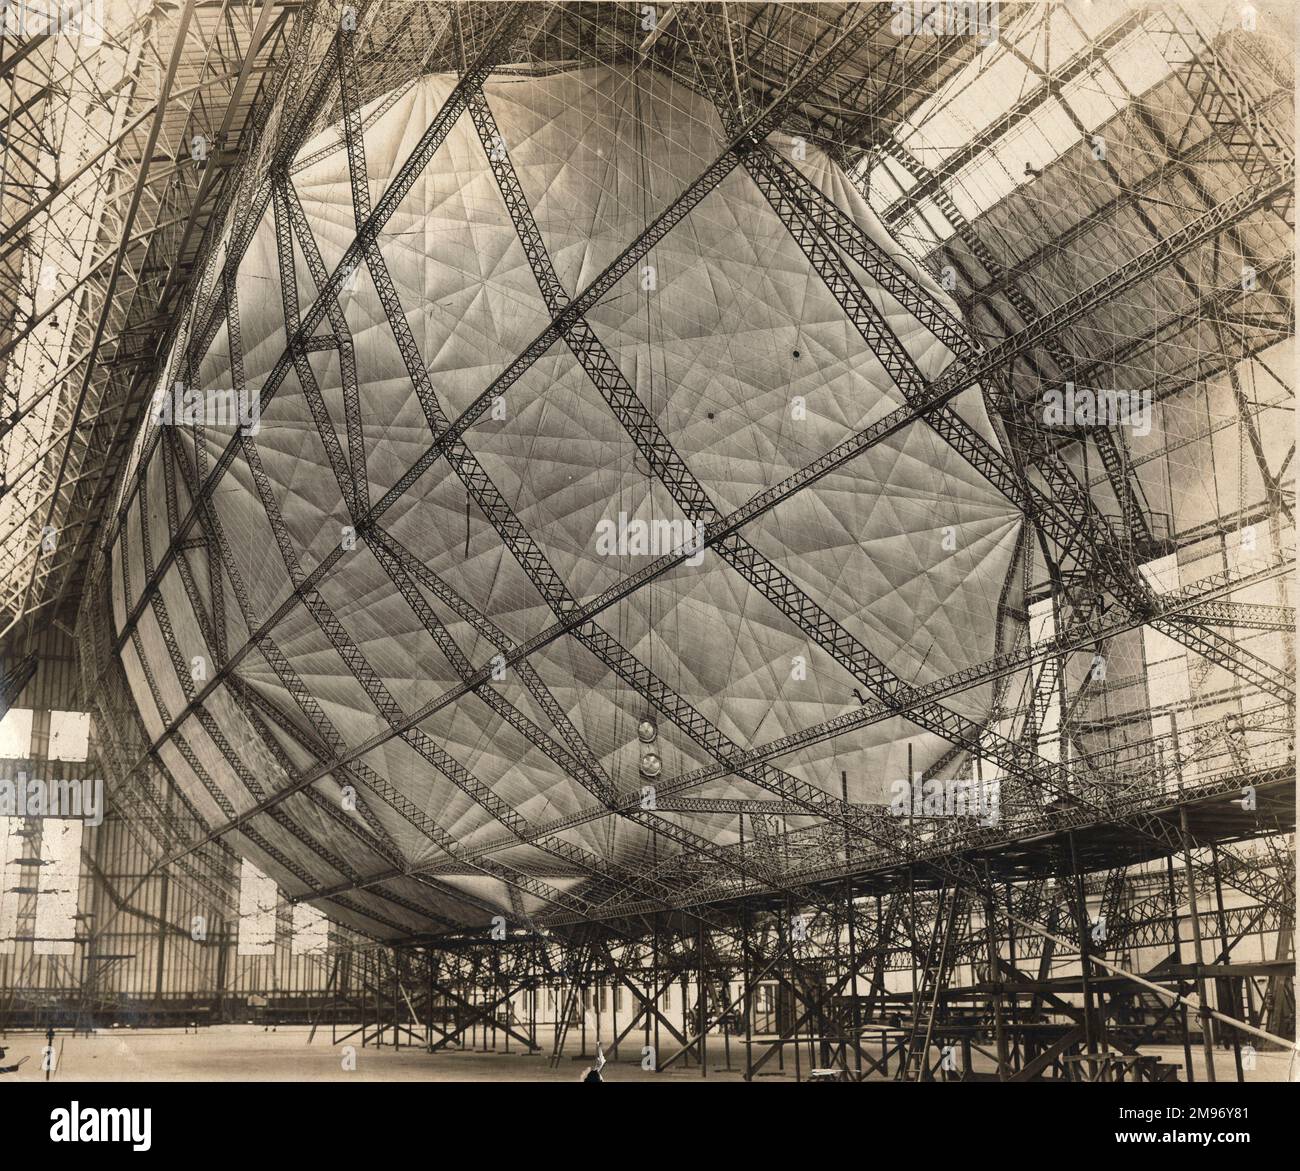 Airship Los Angeles under construction with one test cell inflated. Stock Photo